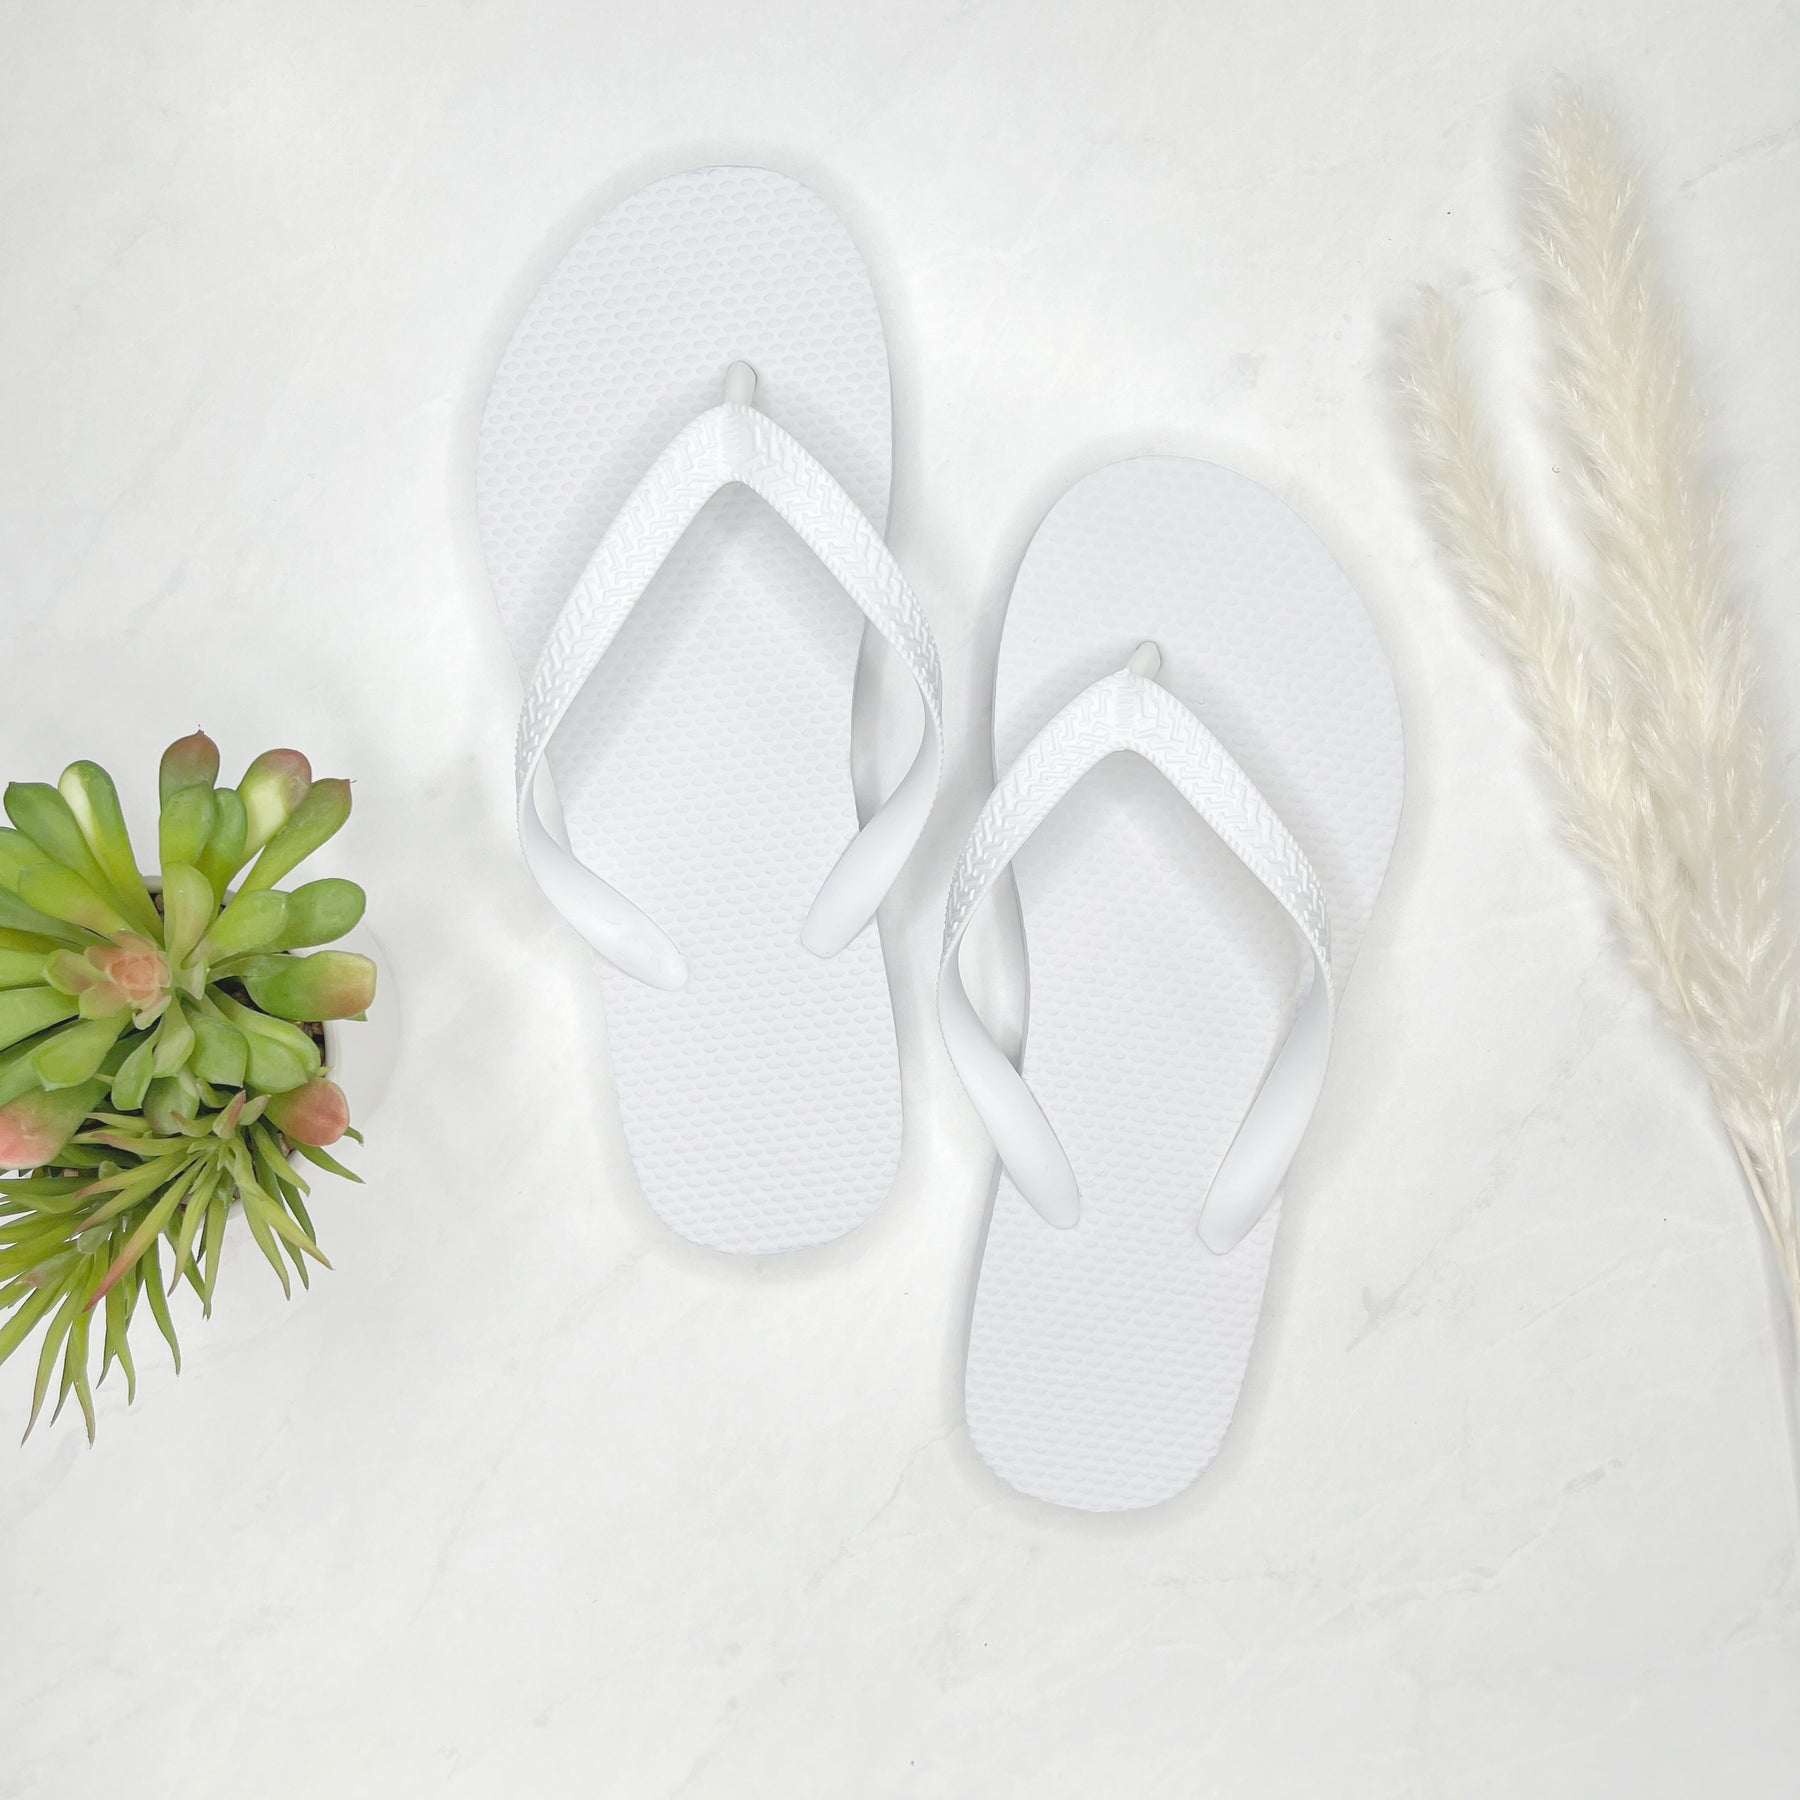 Wholesale and Bulk Flip Flops: They're Not Just for Summer Anymore —